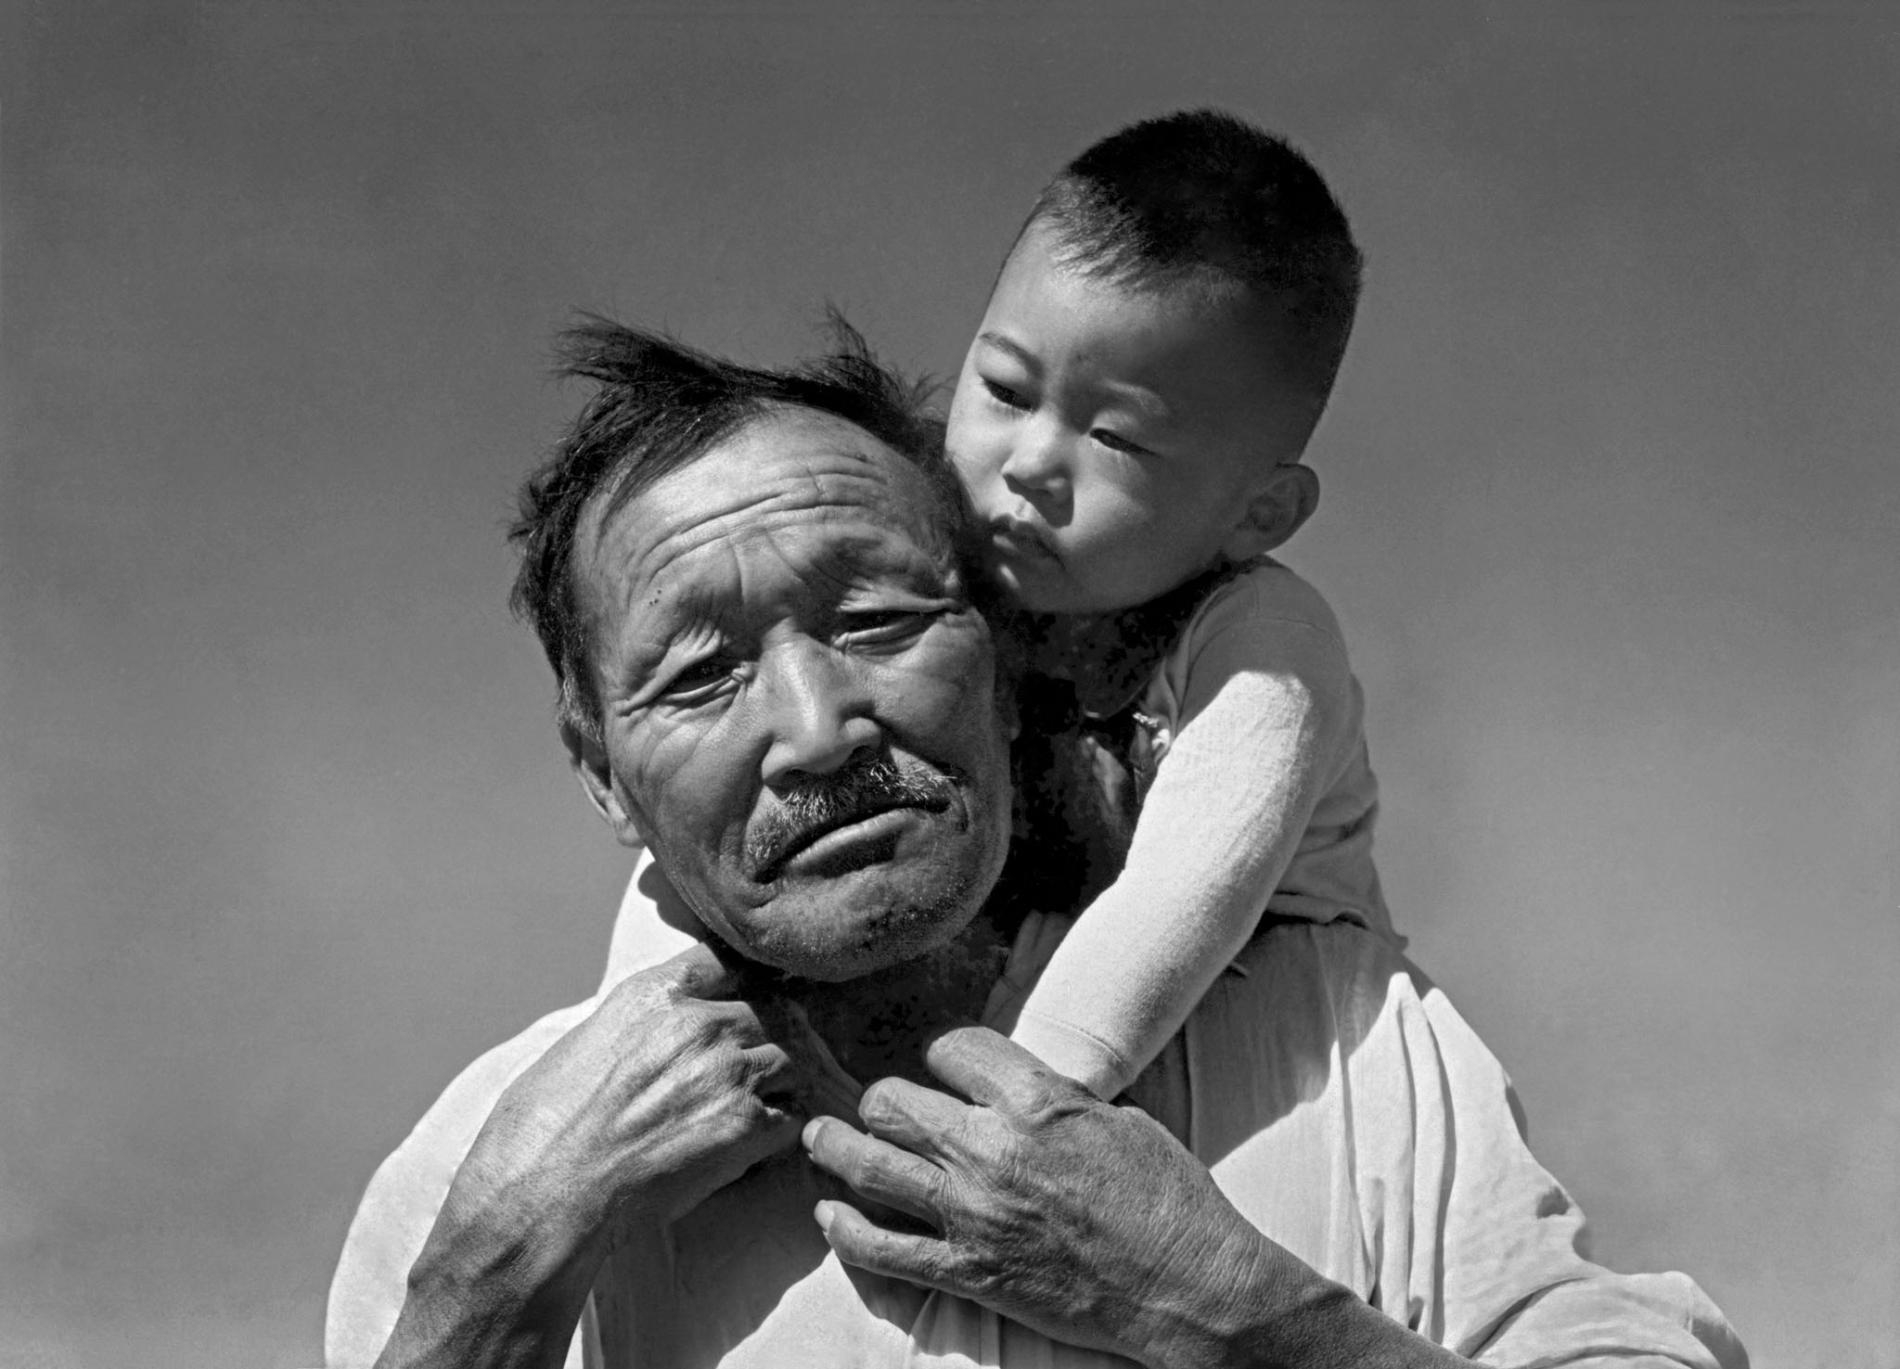 PHOTOGRAPH BY DOROTHEA LANGE, NATIONAL ARCHIVES